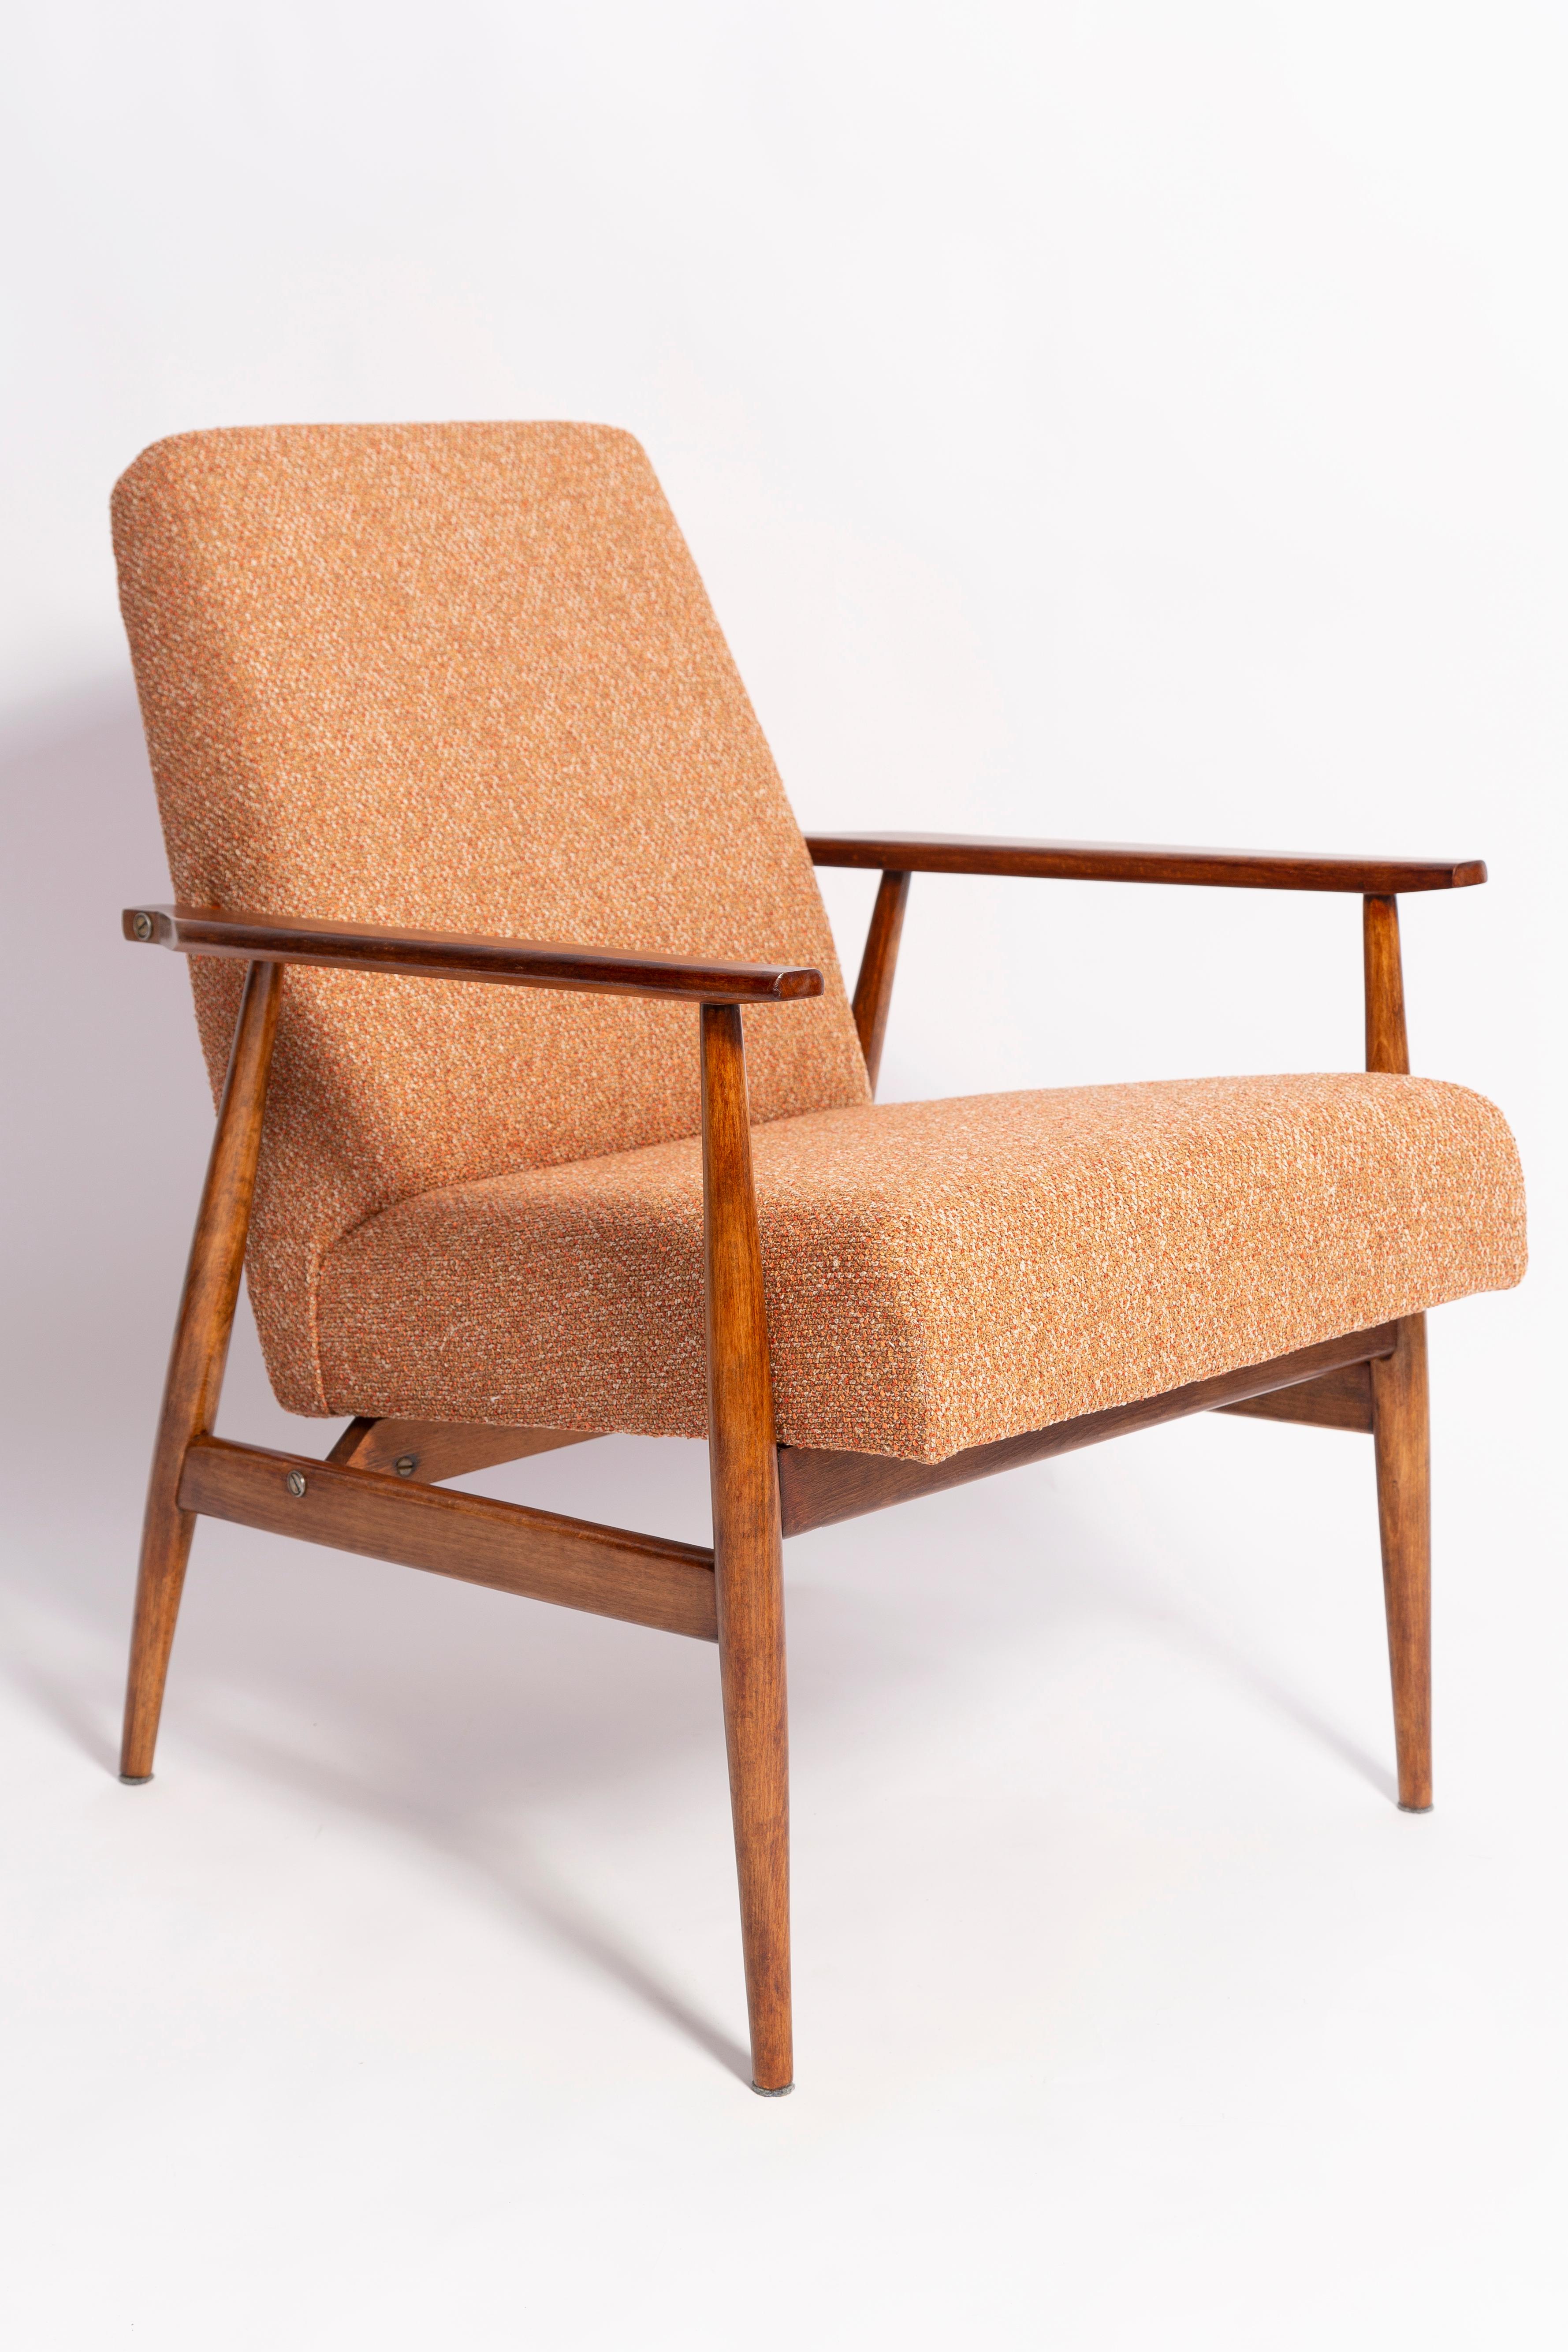 Polish Set of Two Mid Century Melange Orange Dante Armchairs and stools, H. Lis, 1960s For Sale